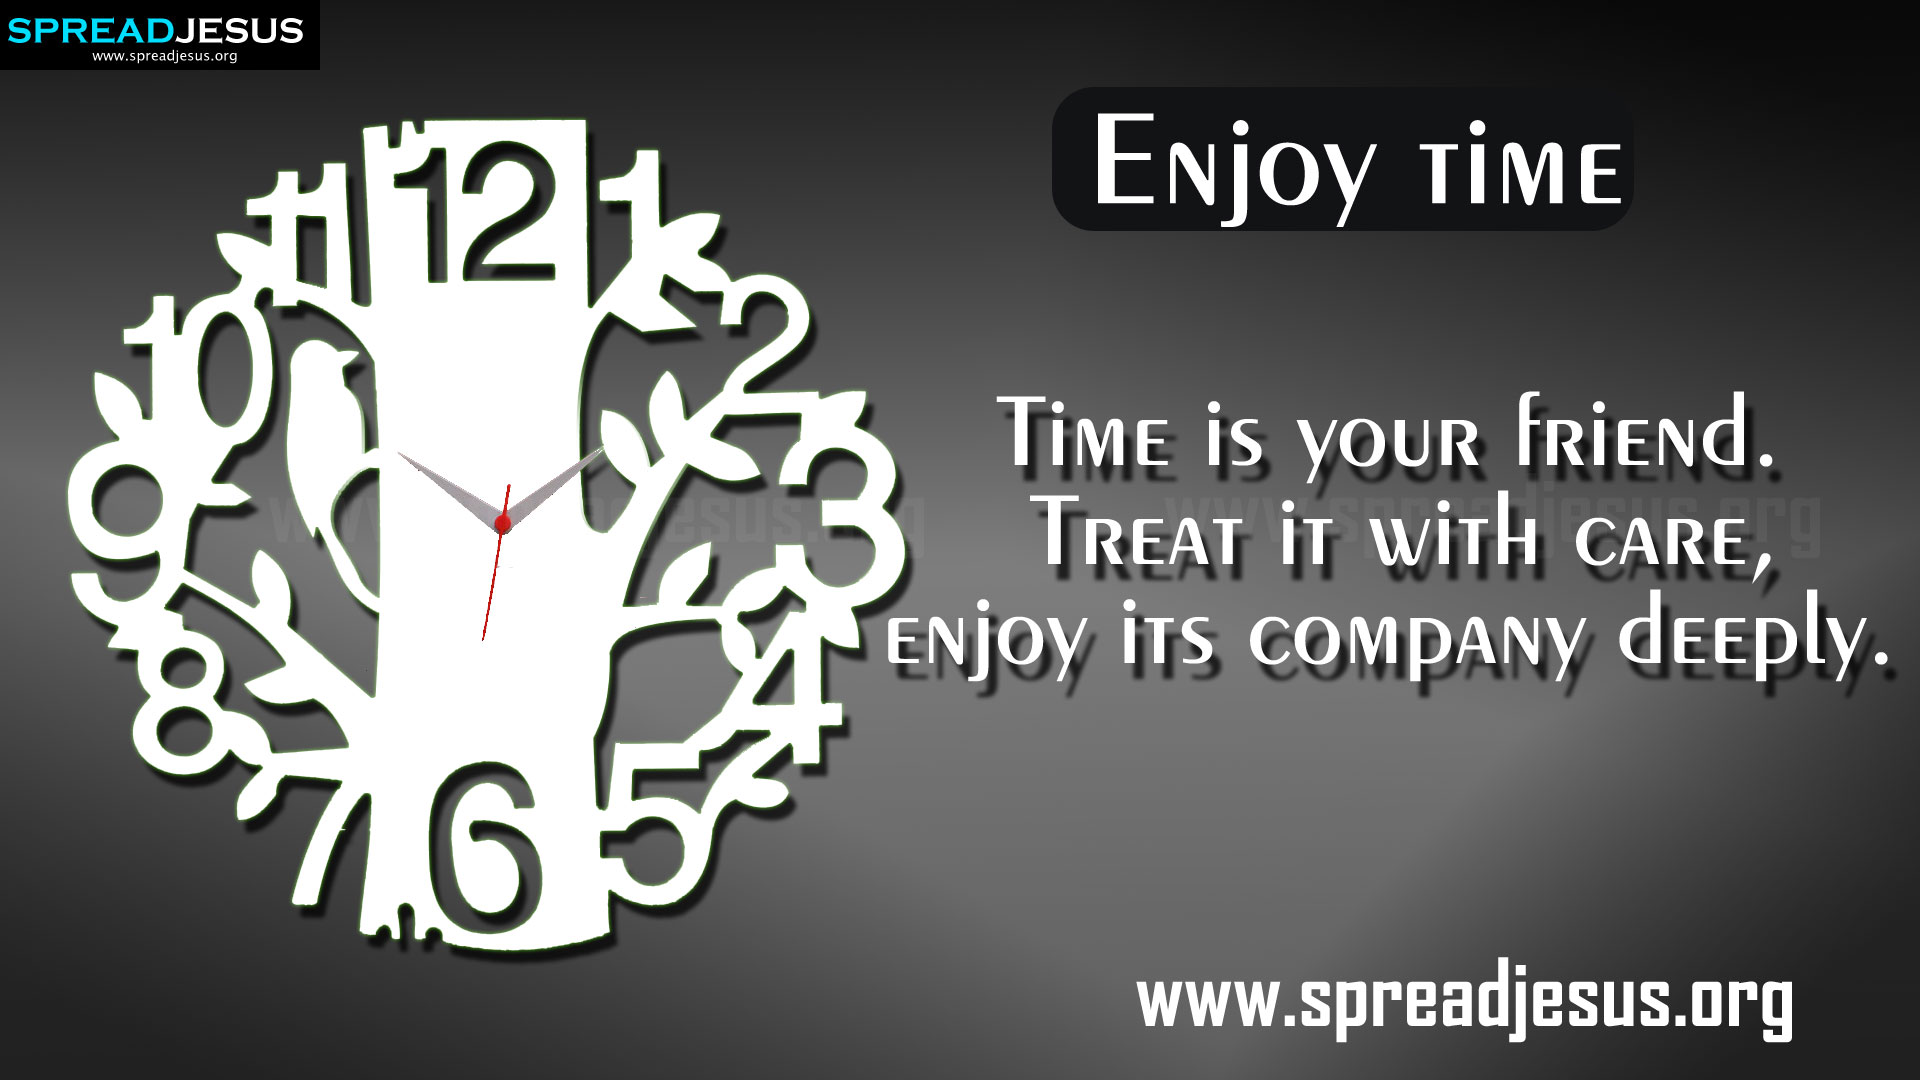 Time is your friend, treat it with care, enjoy its company deeply